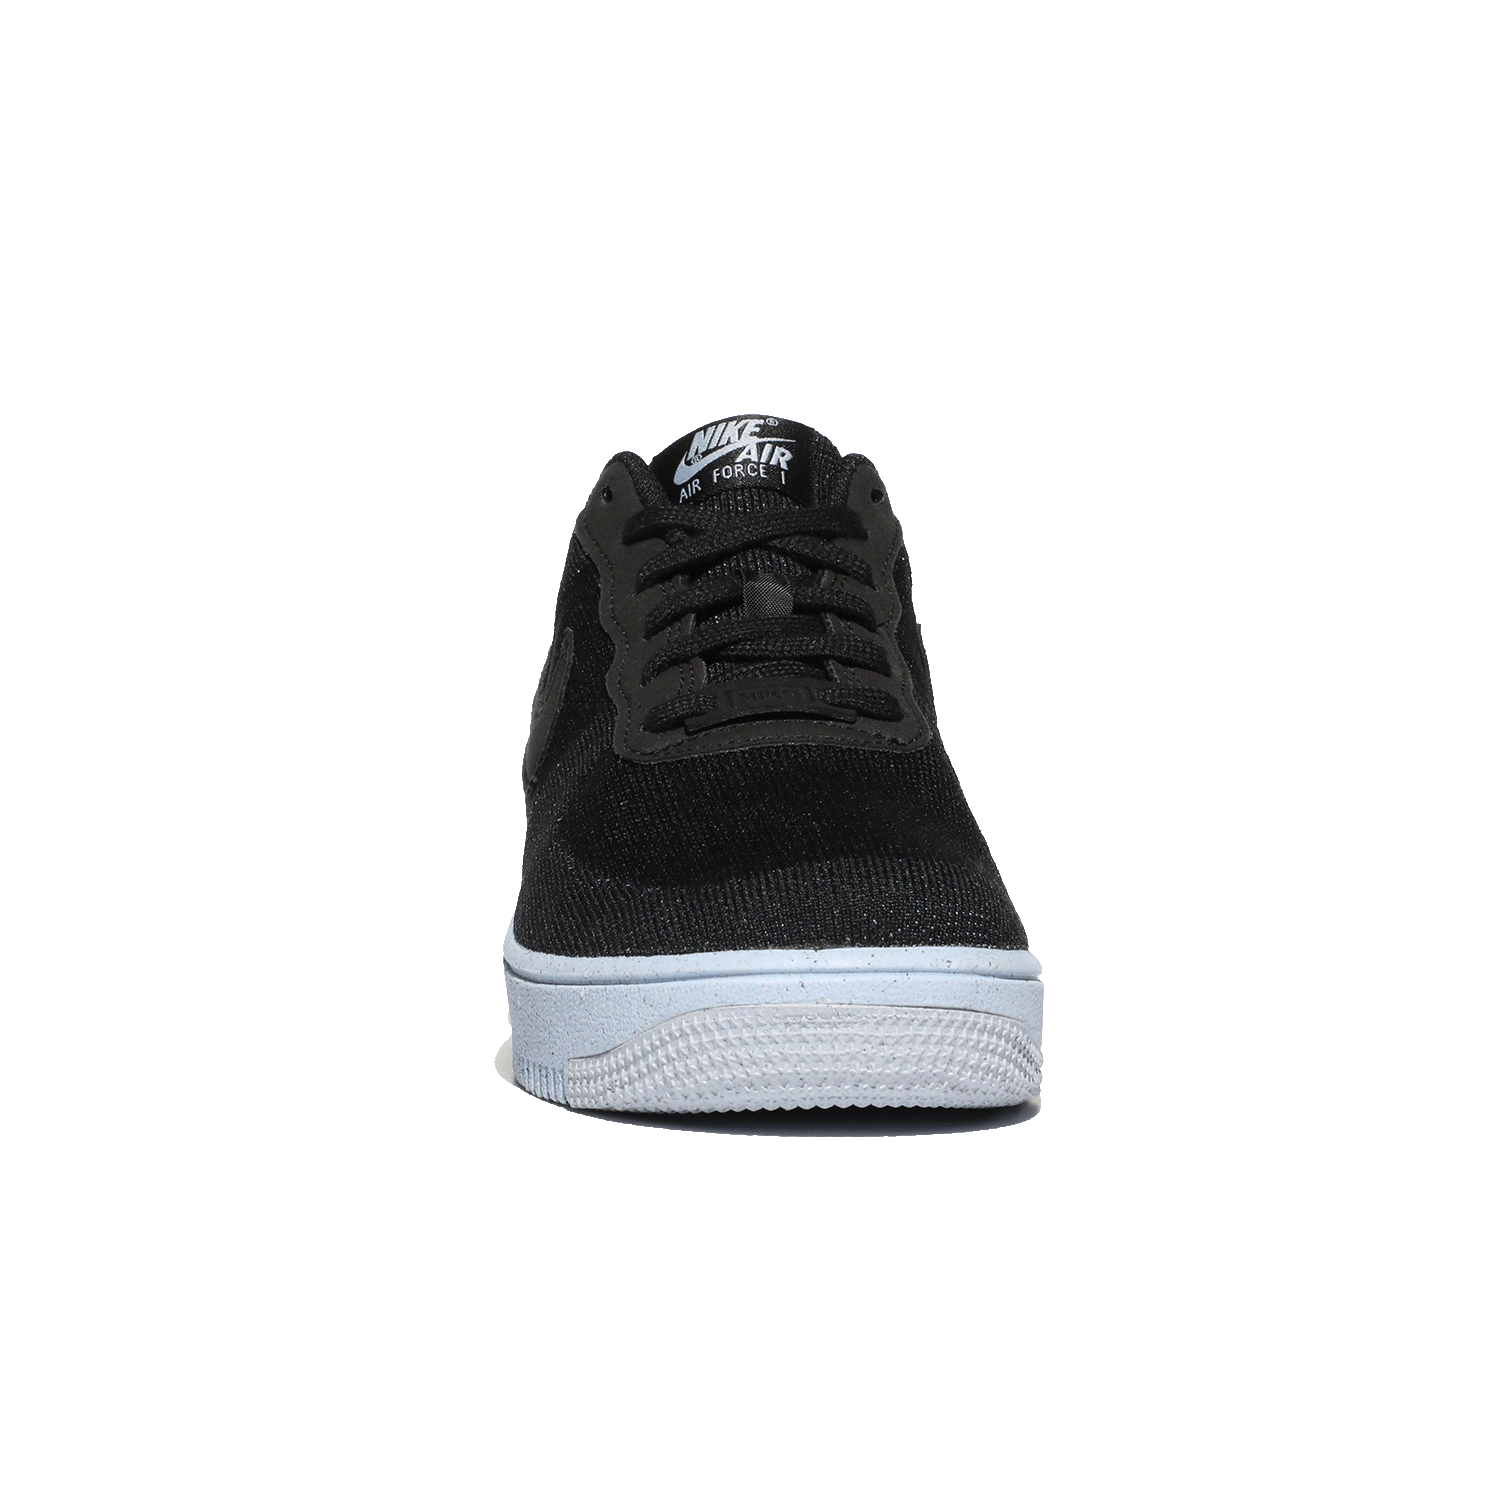 Image 4 of Air Force 1 Crater Flyknit (Big Kid)